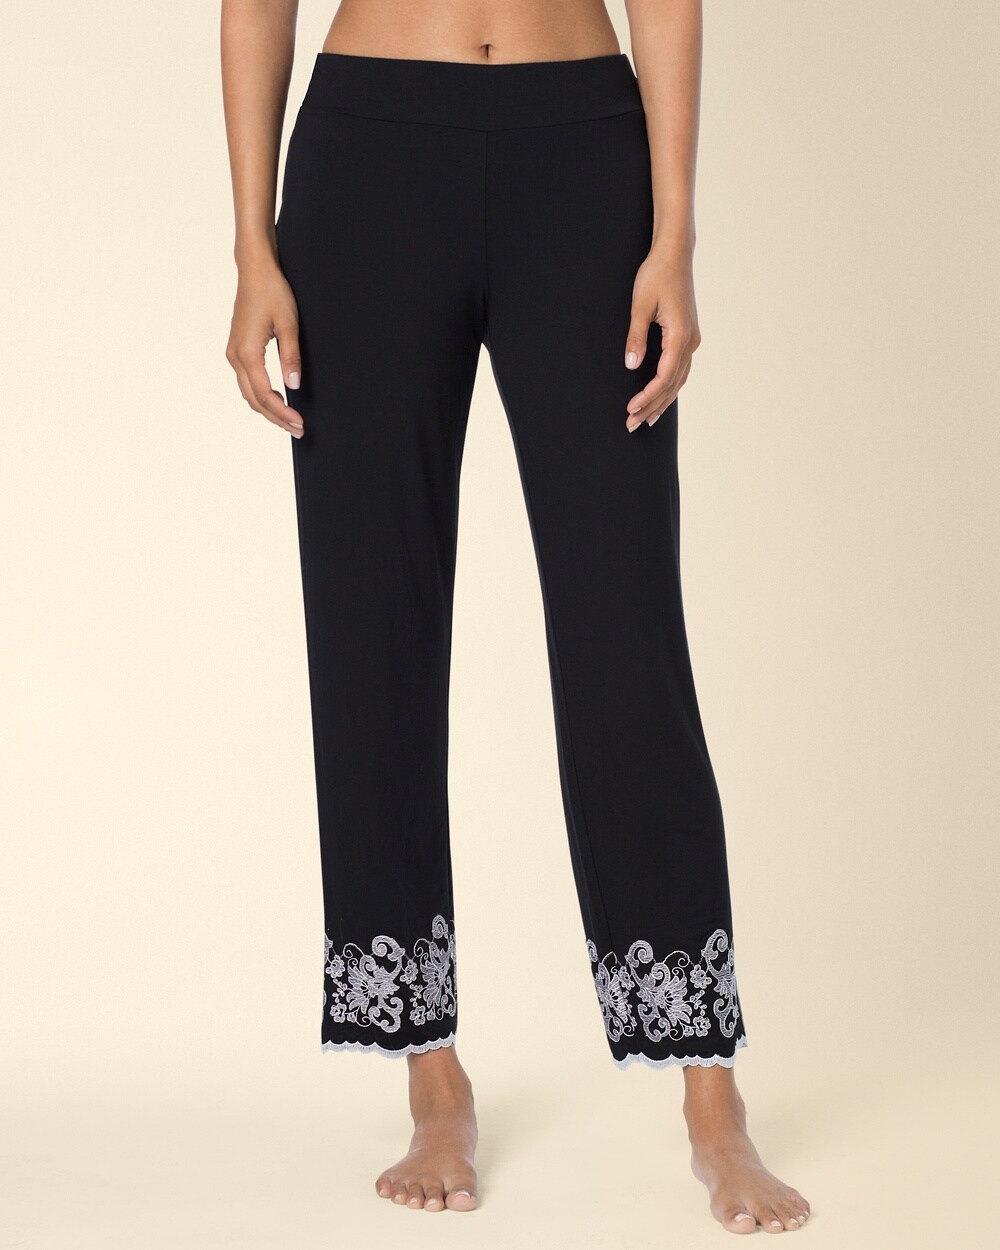 Scalloped Embroidery Ankle Pajama Pants Black with Ivory Lace